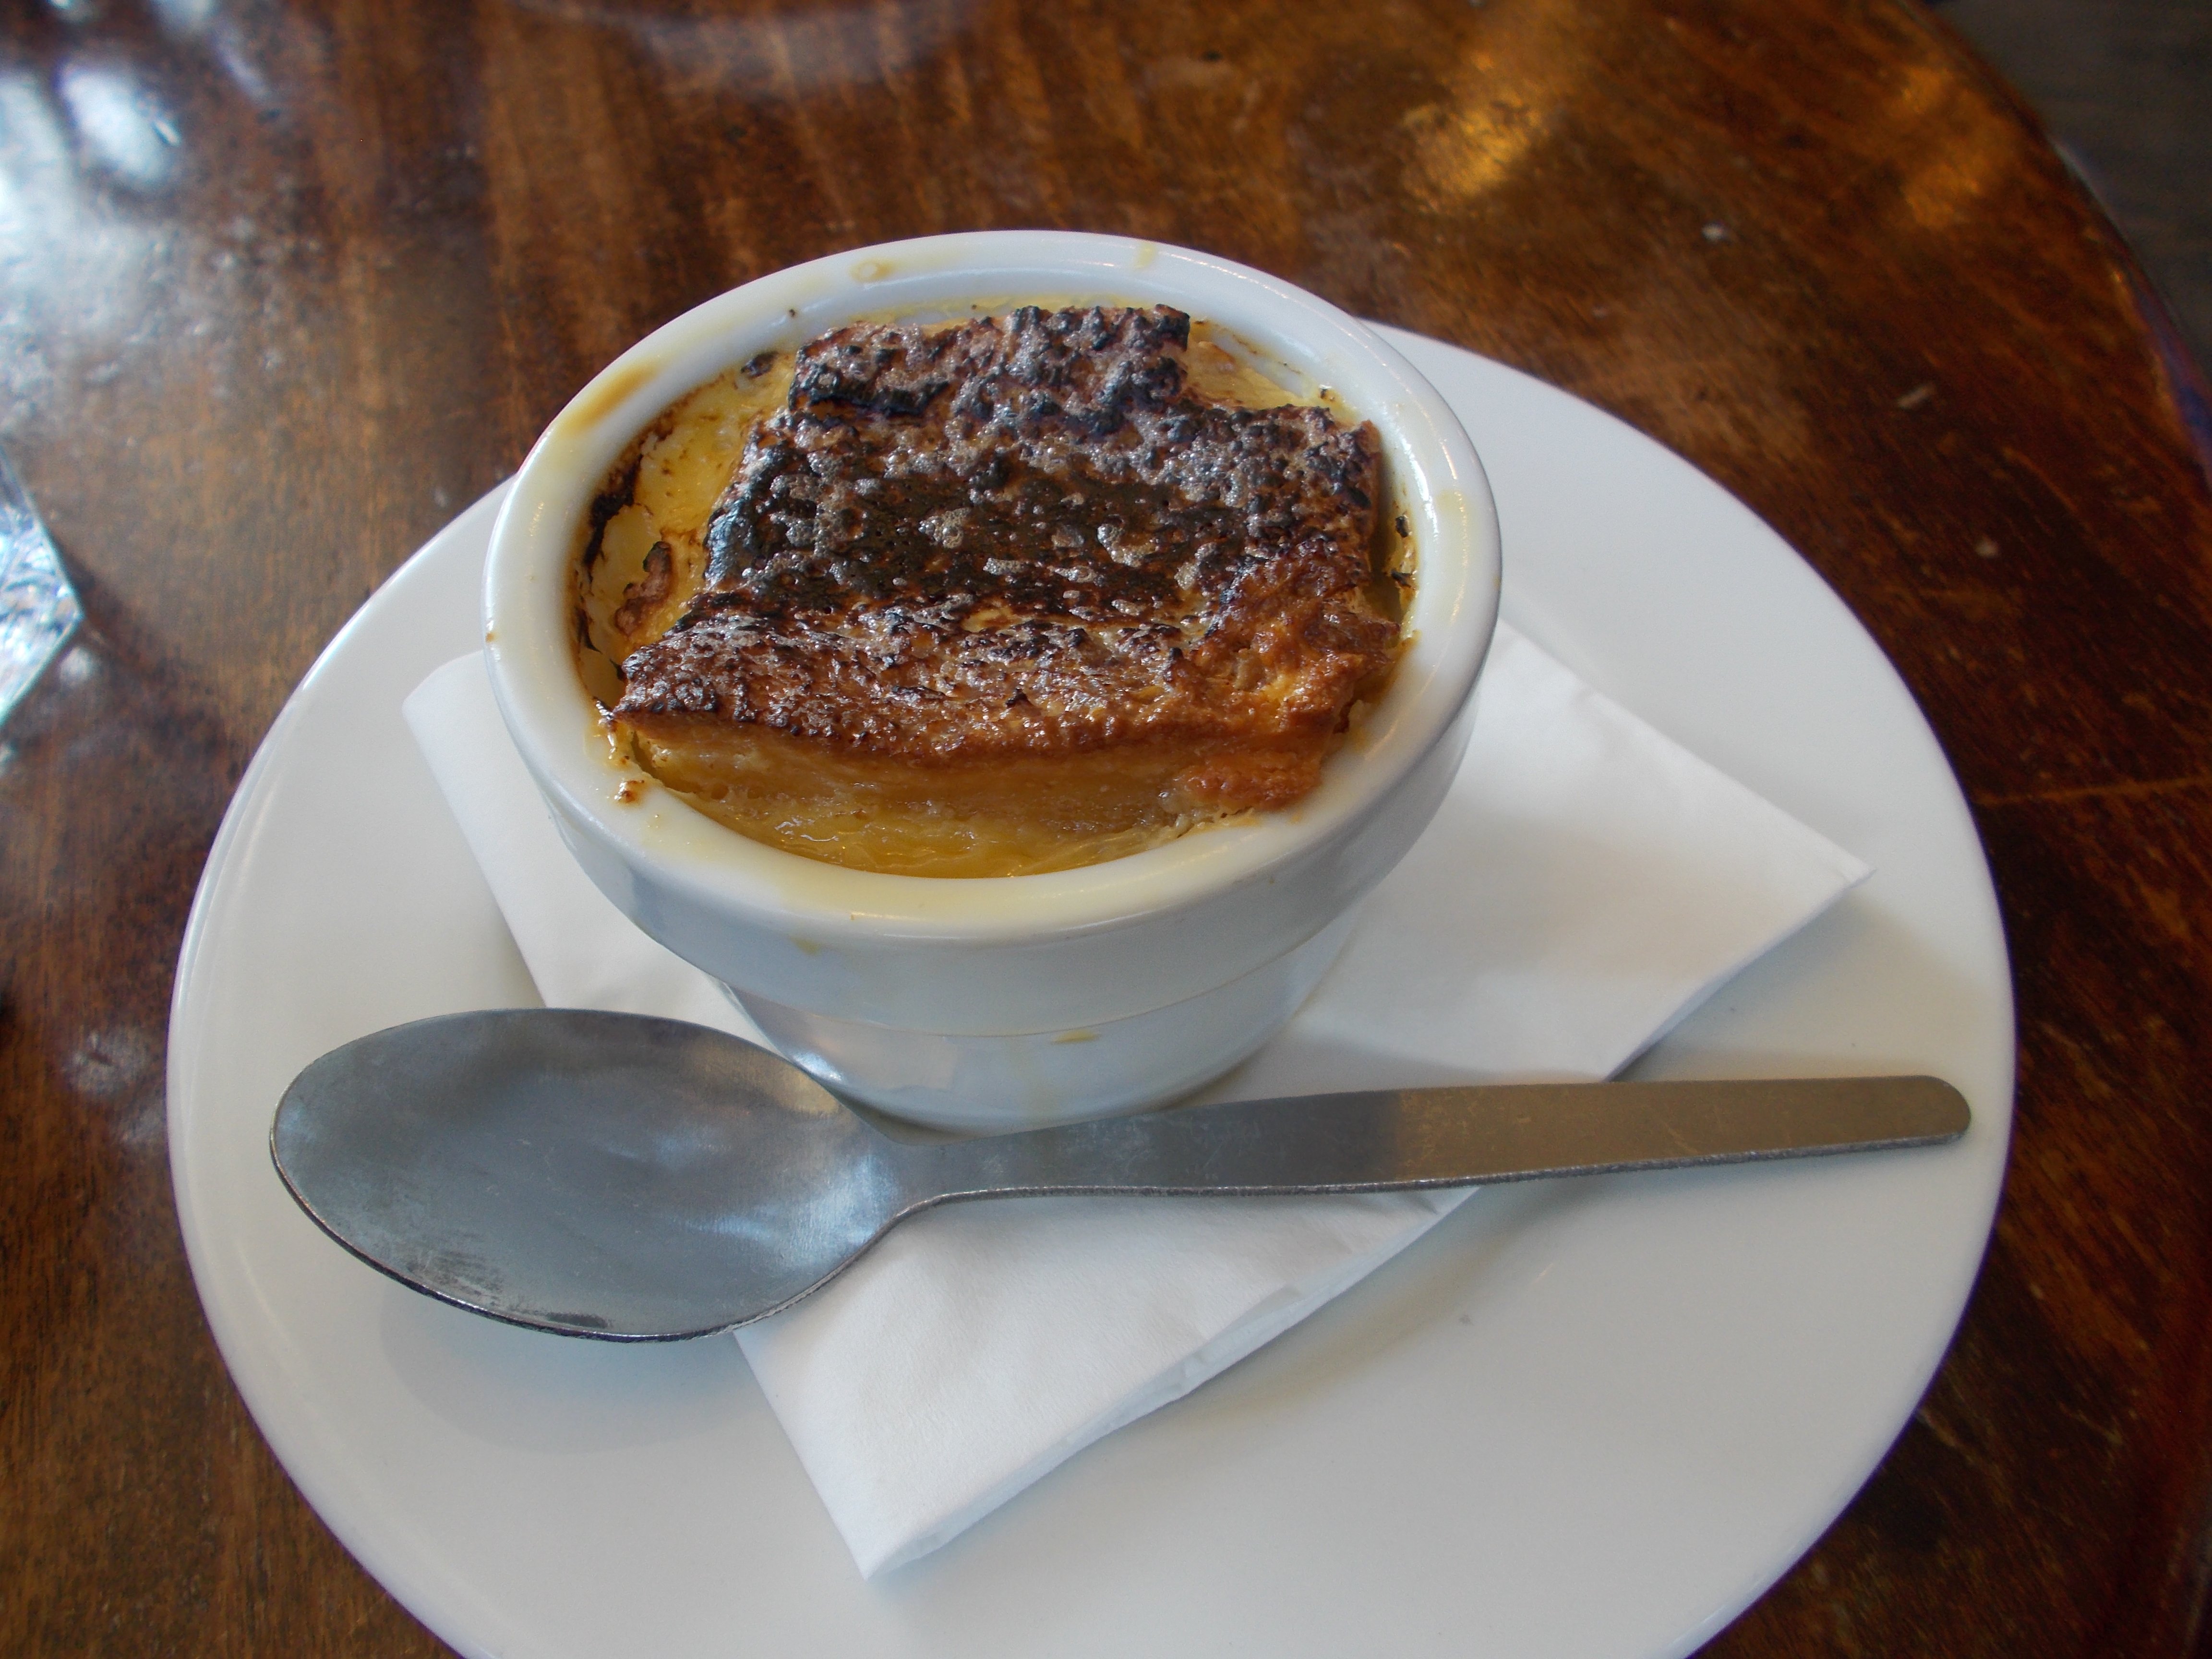 Bread and Butter Pudding The English Breakfast at Spitalfields